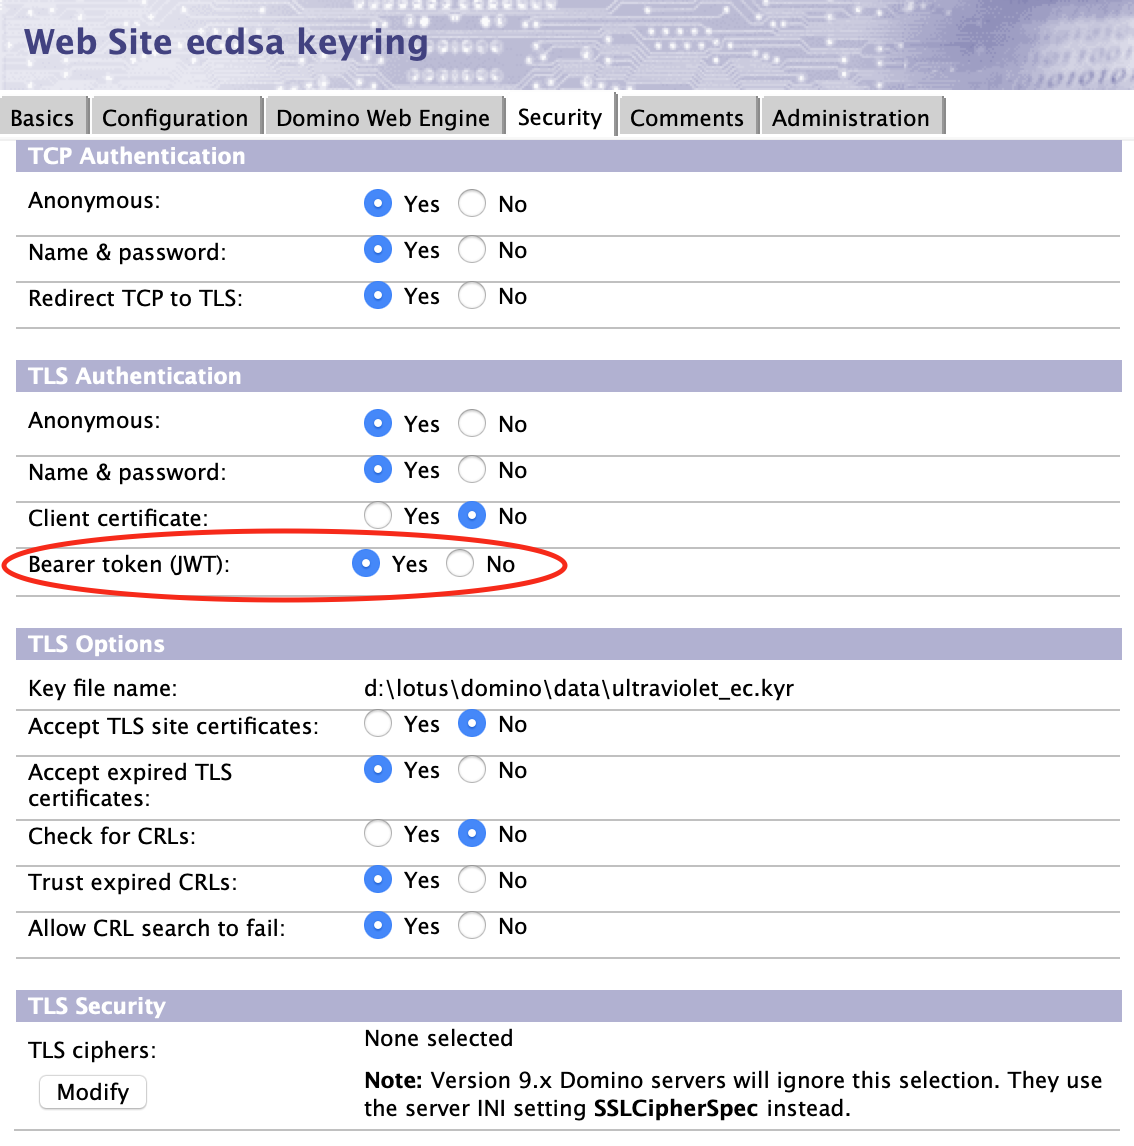 Internet site document showing Security tab with Bearer token (JWT) option set to Yes